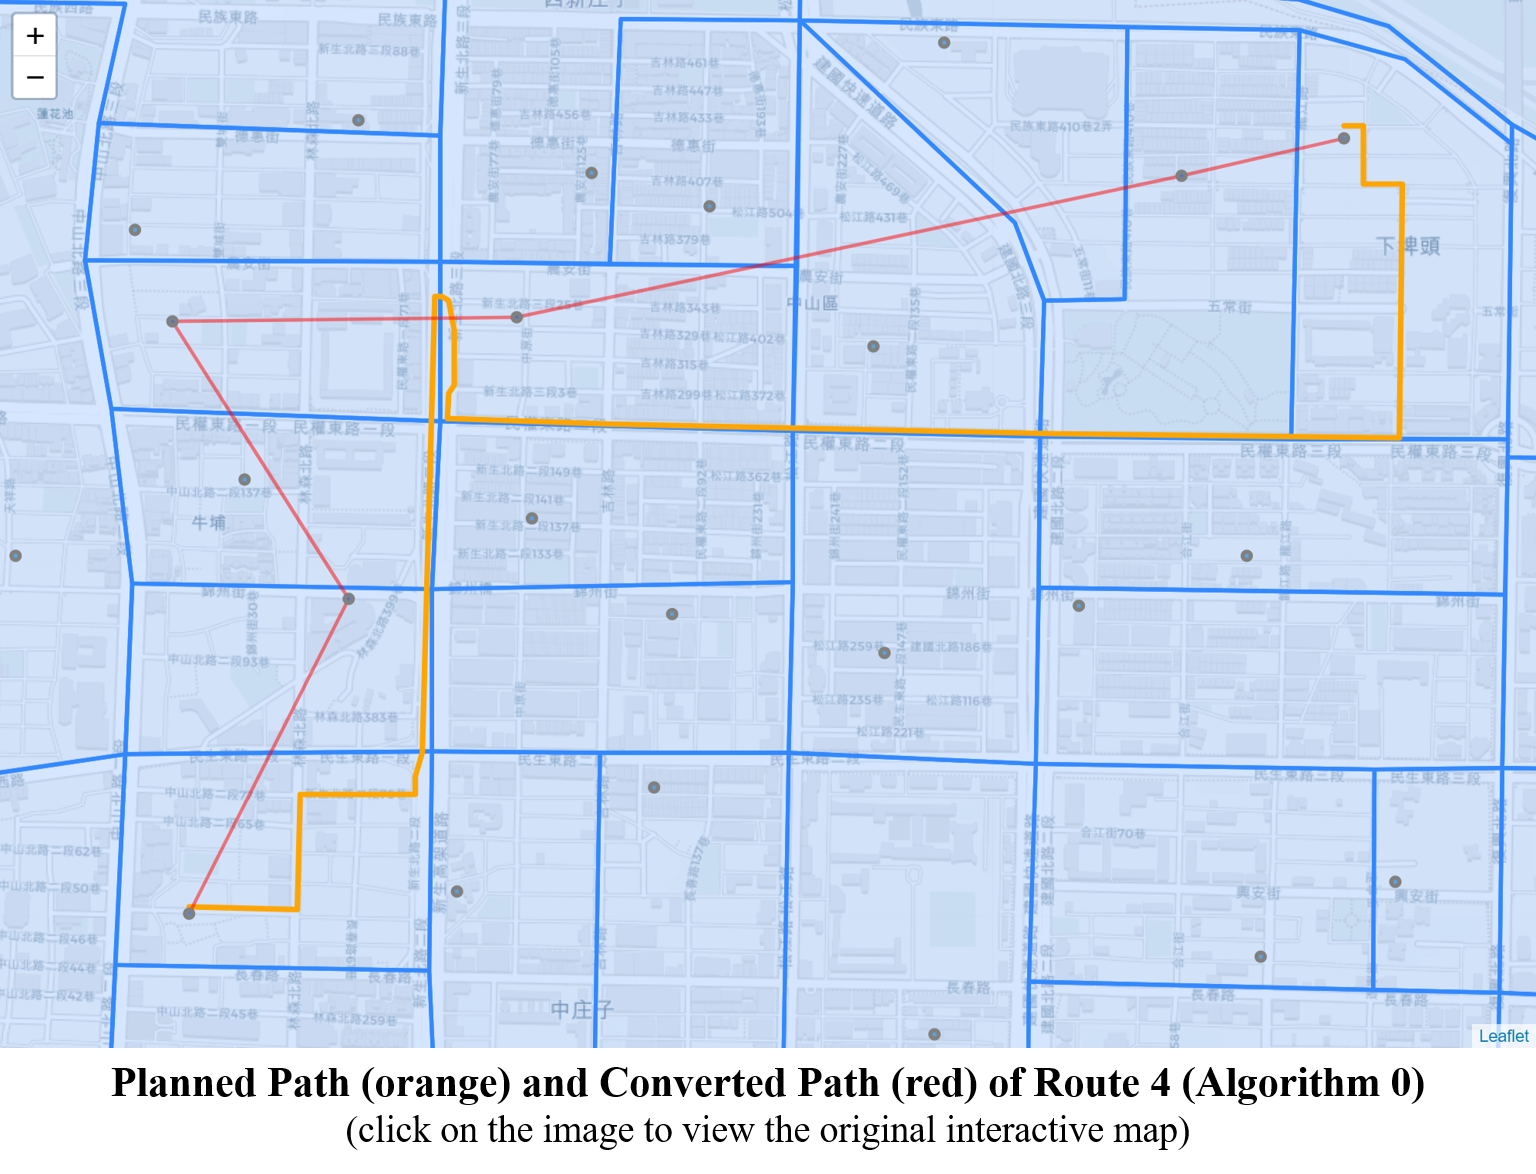 3_1_Planned_Path_orange_and_Converted_Path_of_Route_4_Algorithm_0